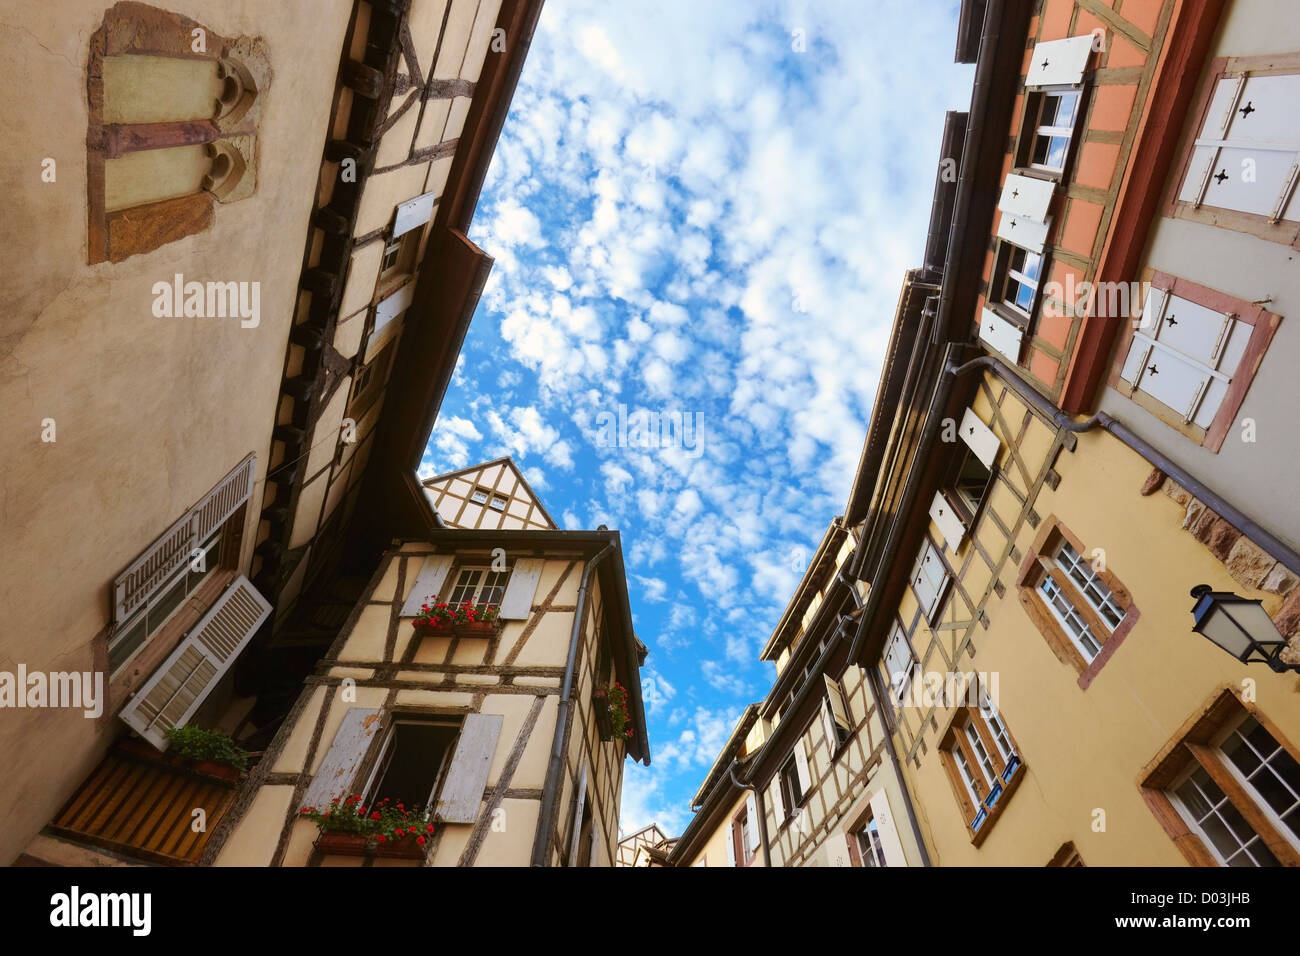 Tanner's district. Colmar, Alsace, France Stock Photo